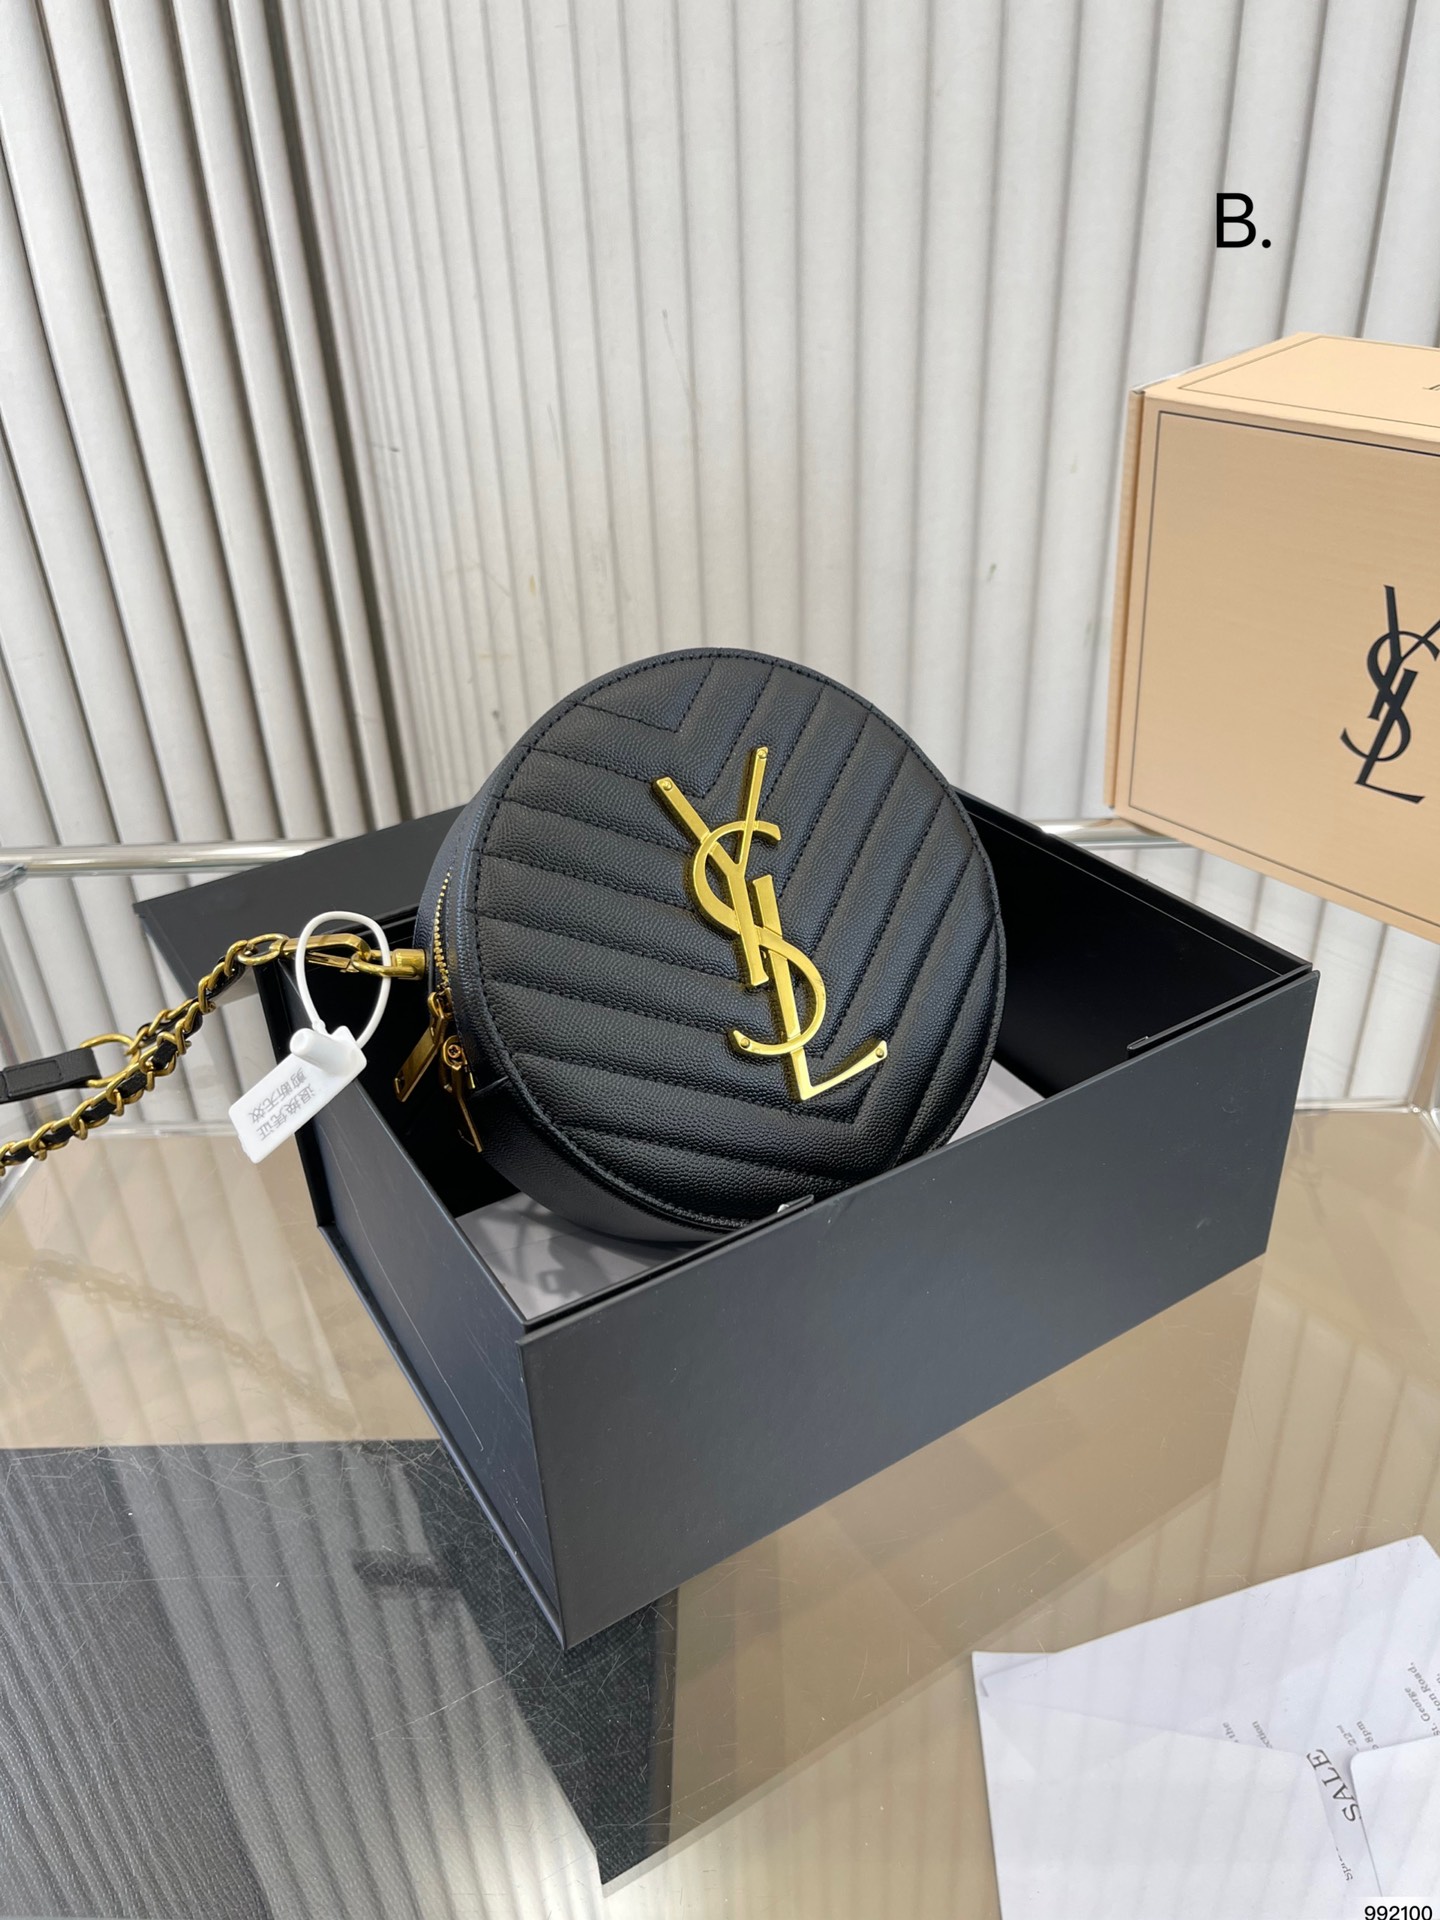 Yves Saint Laurent Cylinder & Round Bags Fall Collection Vintage Chains